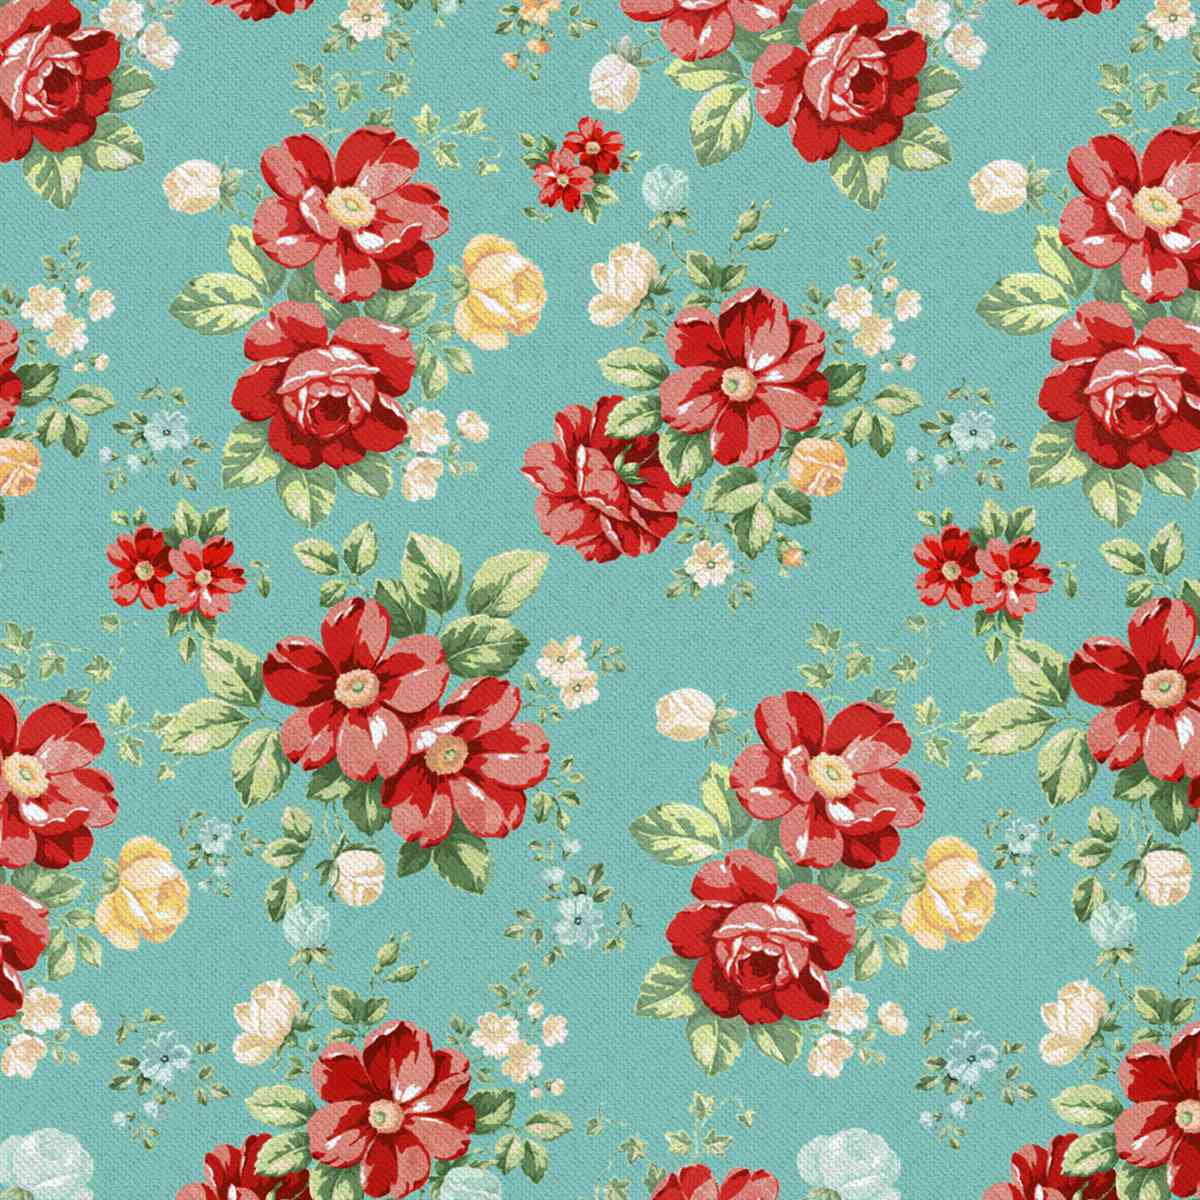 The Pioneer Woman Vintage Floral Fabric